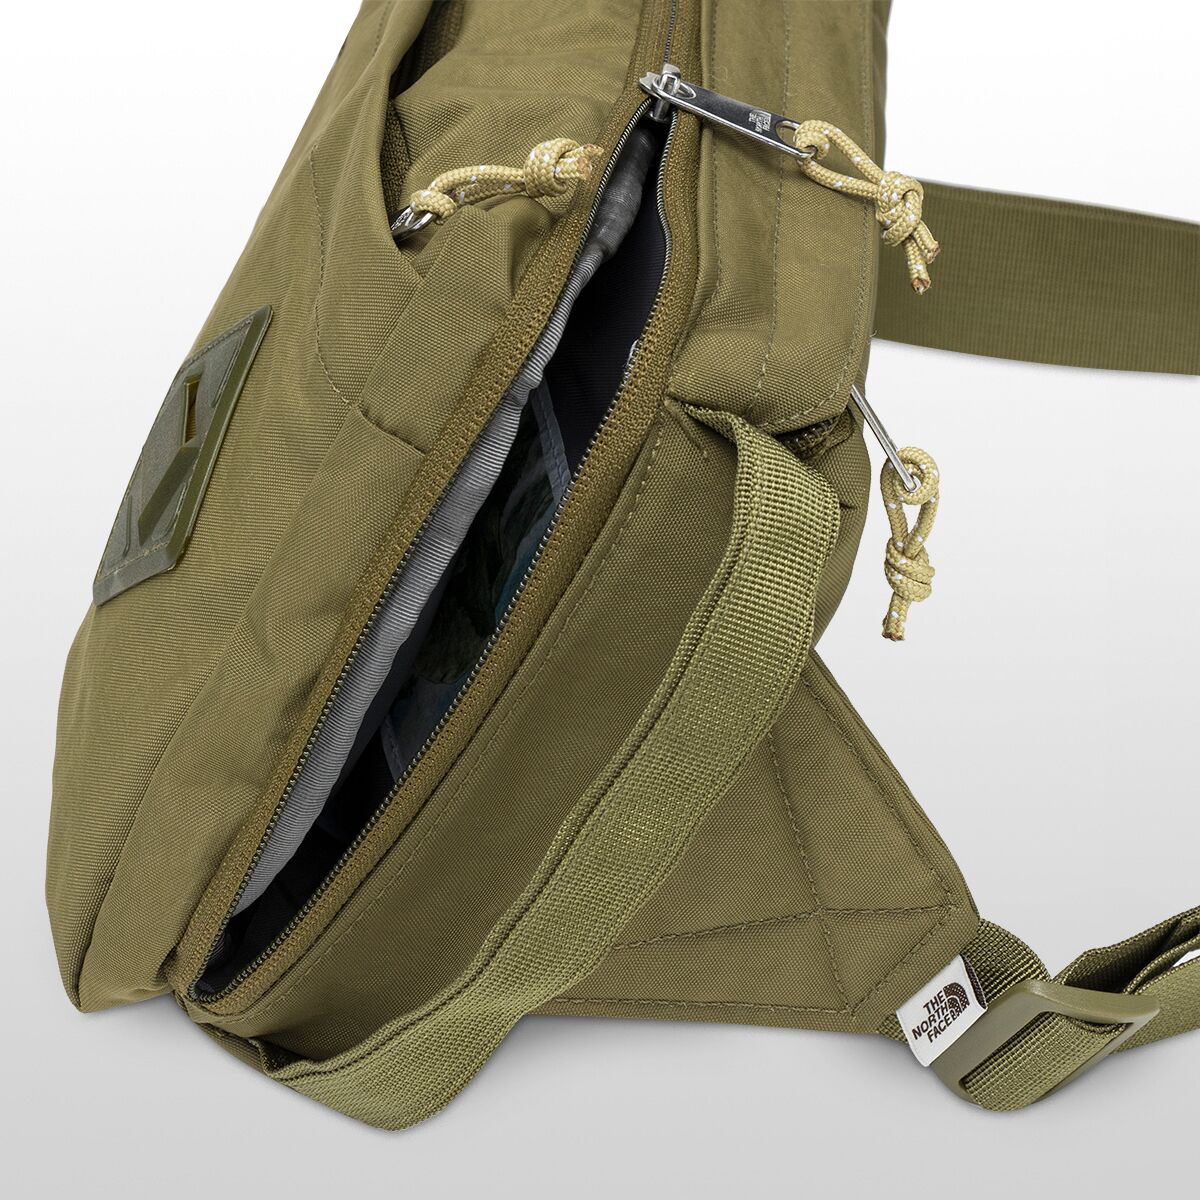 The North Face Berkeley Field Bag - Accessories